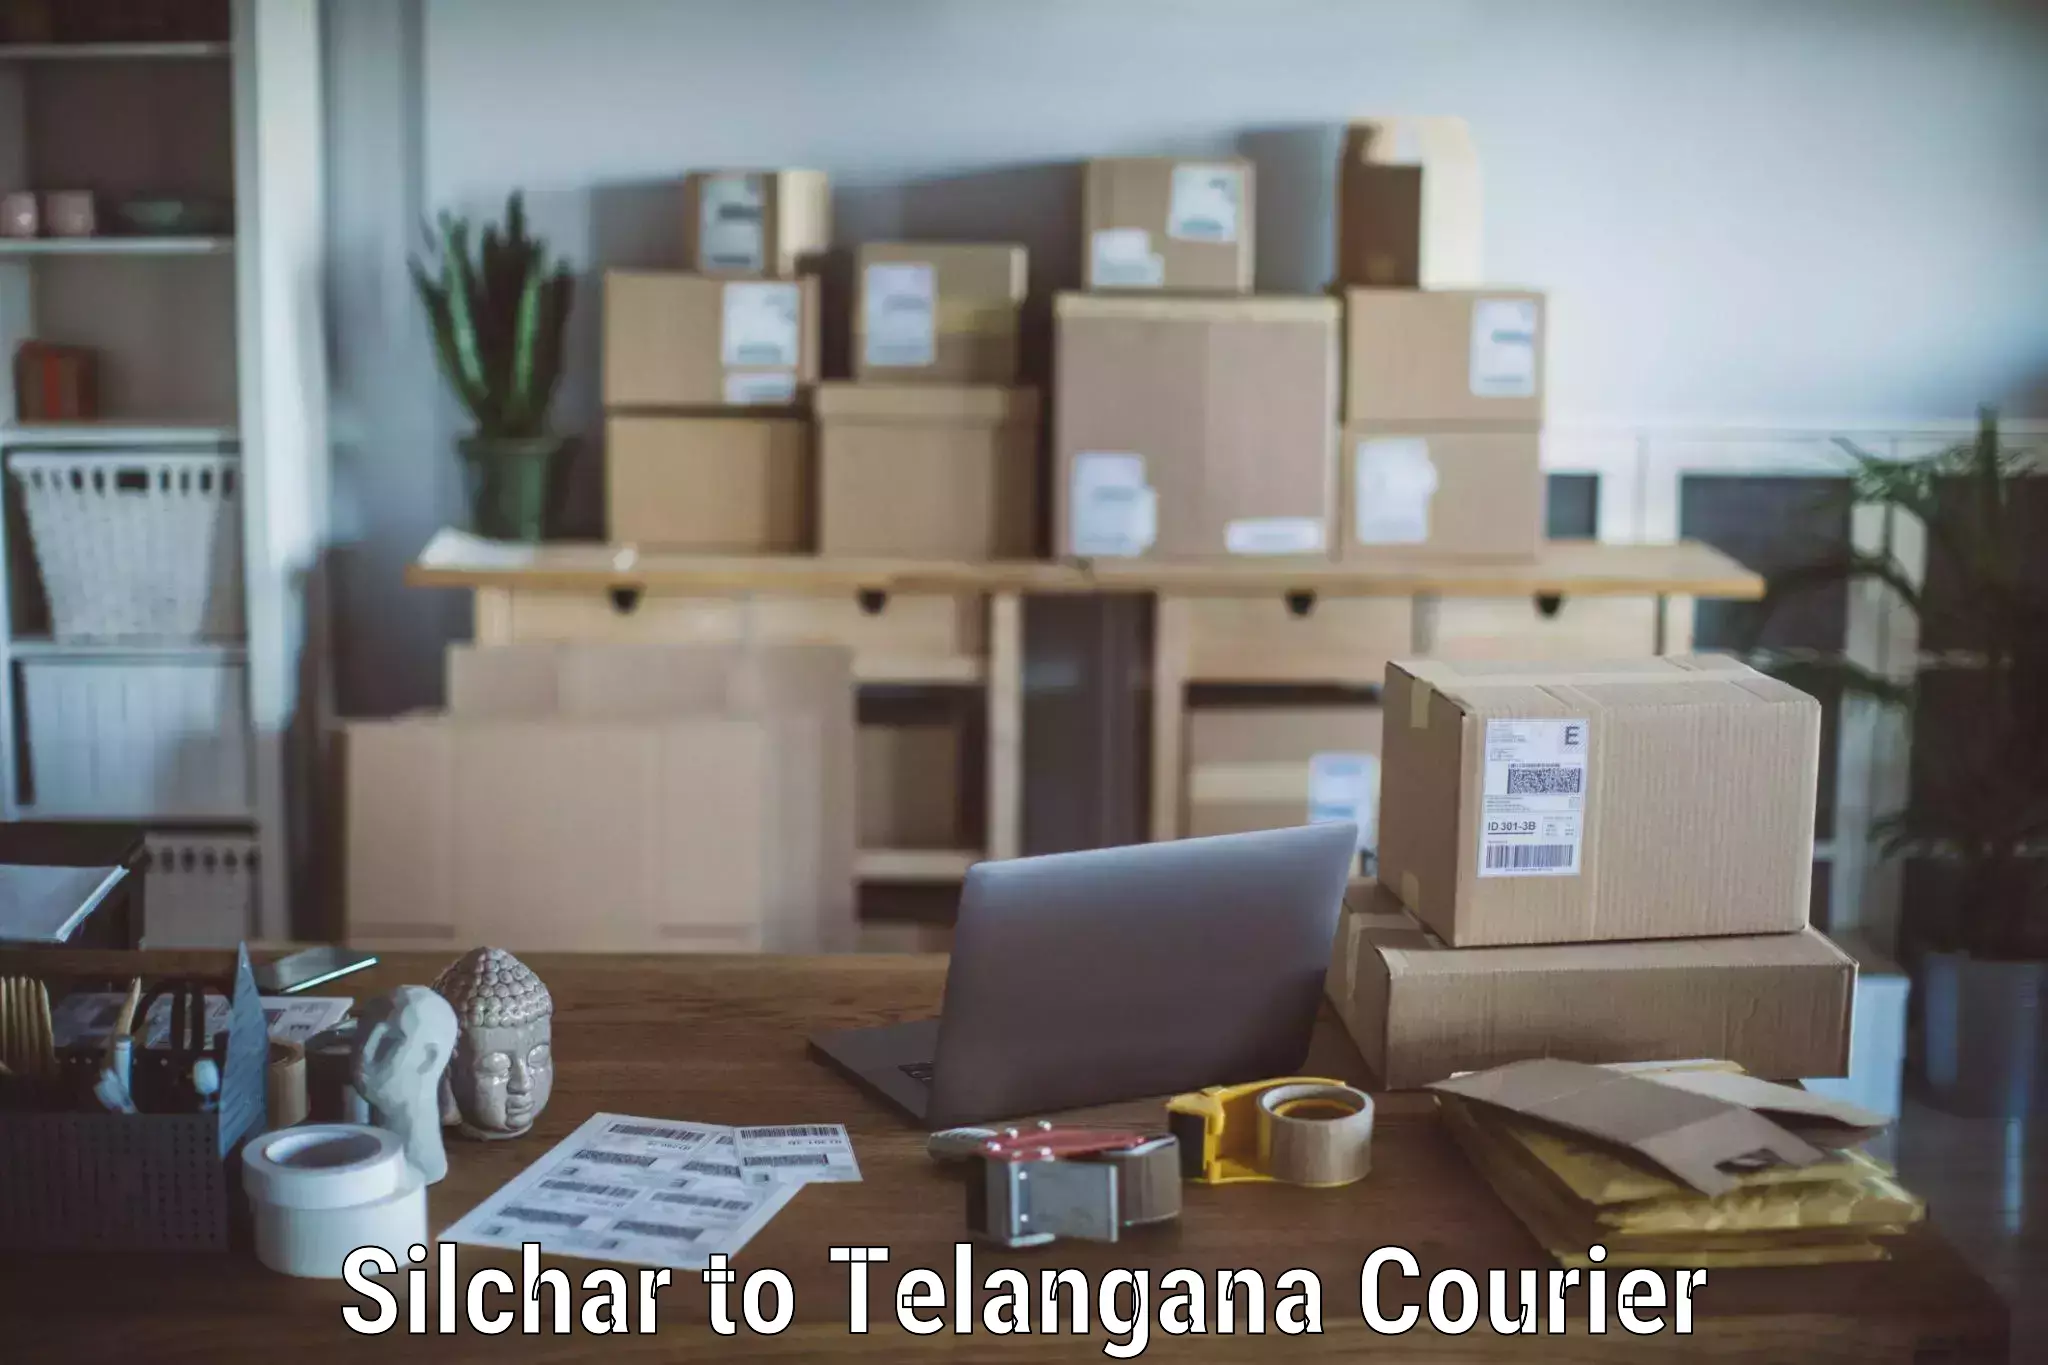 Furniture transport specialists Silchar to Moinabad